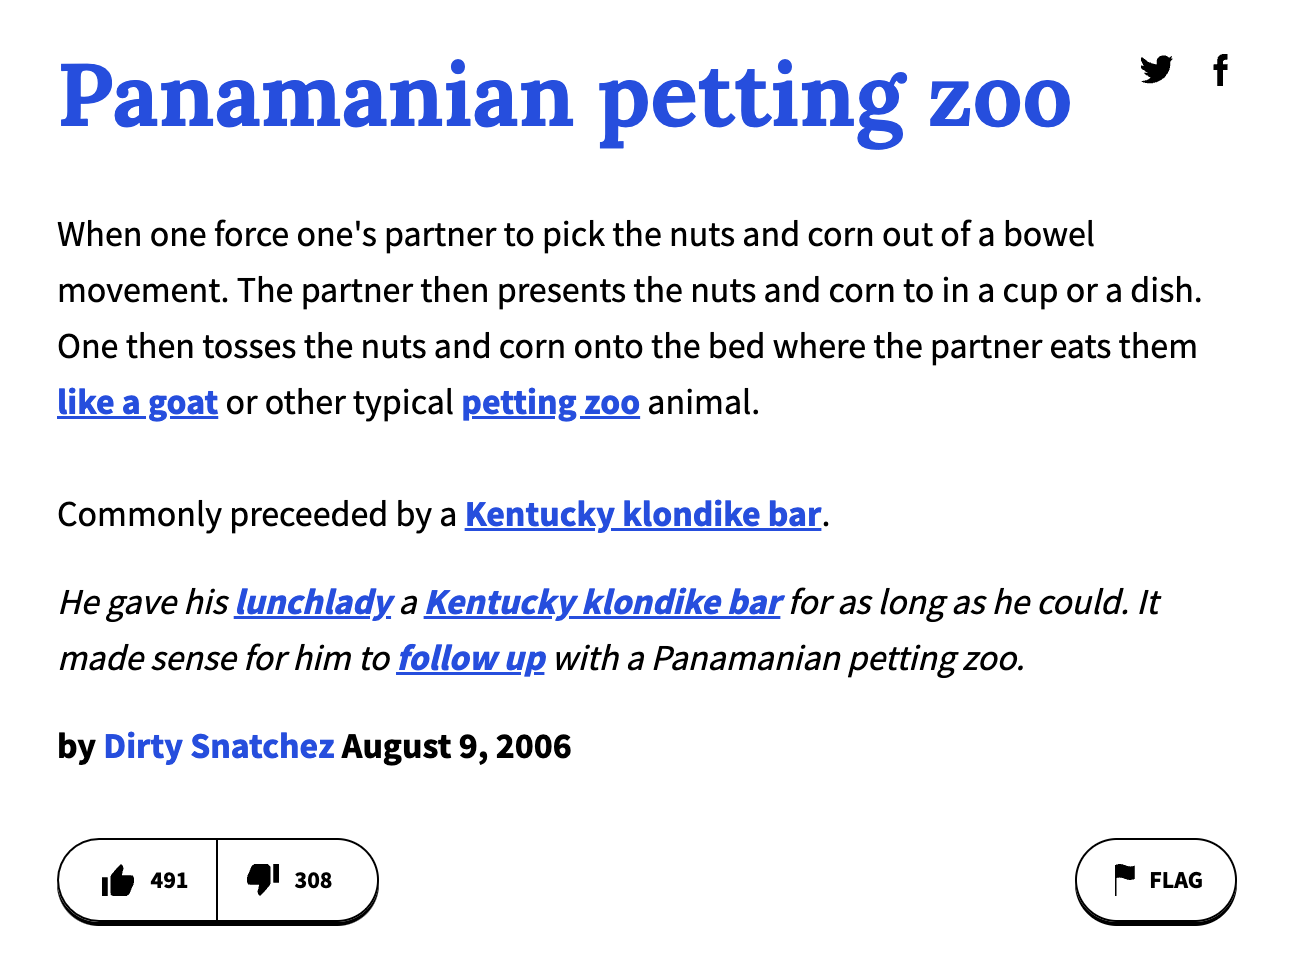 urban dictionary terms - angle - Panamanian petting zoo When one force one's partner to pick the nuts and corn out of a bowel movement. The partner then presents the nuts and corn to in a cup or a dish. One then tosses the nuts and corn onto the bed where